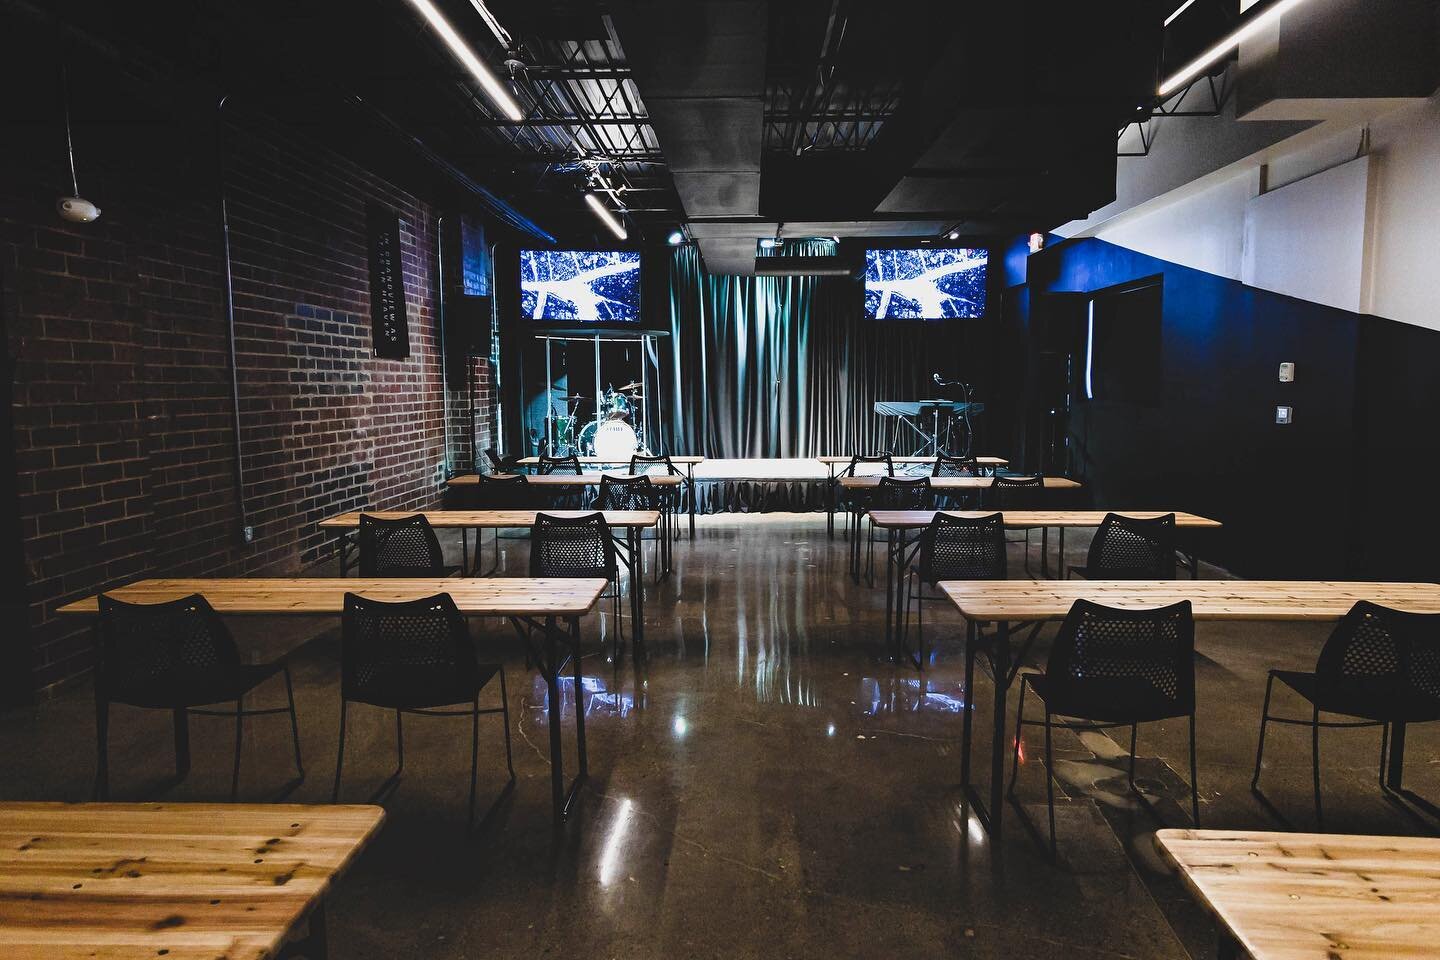 Seminars, classes, large meetings. We&rsquo;ve got the tables and chairs to make it happen!